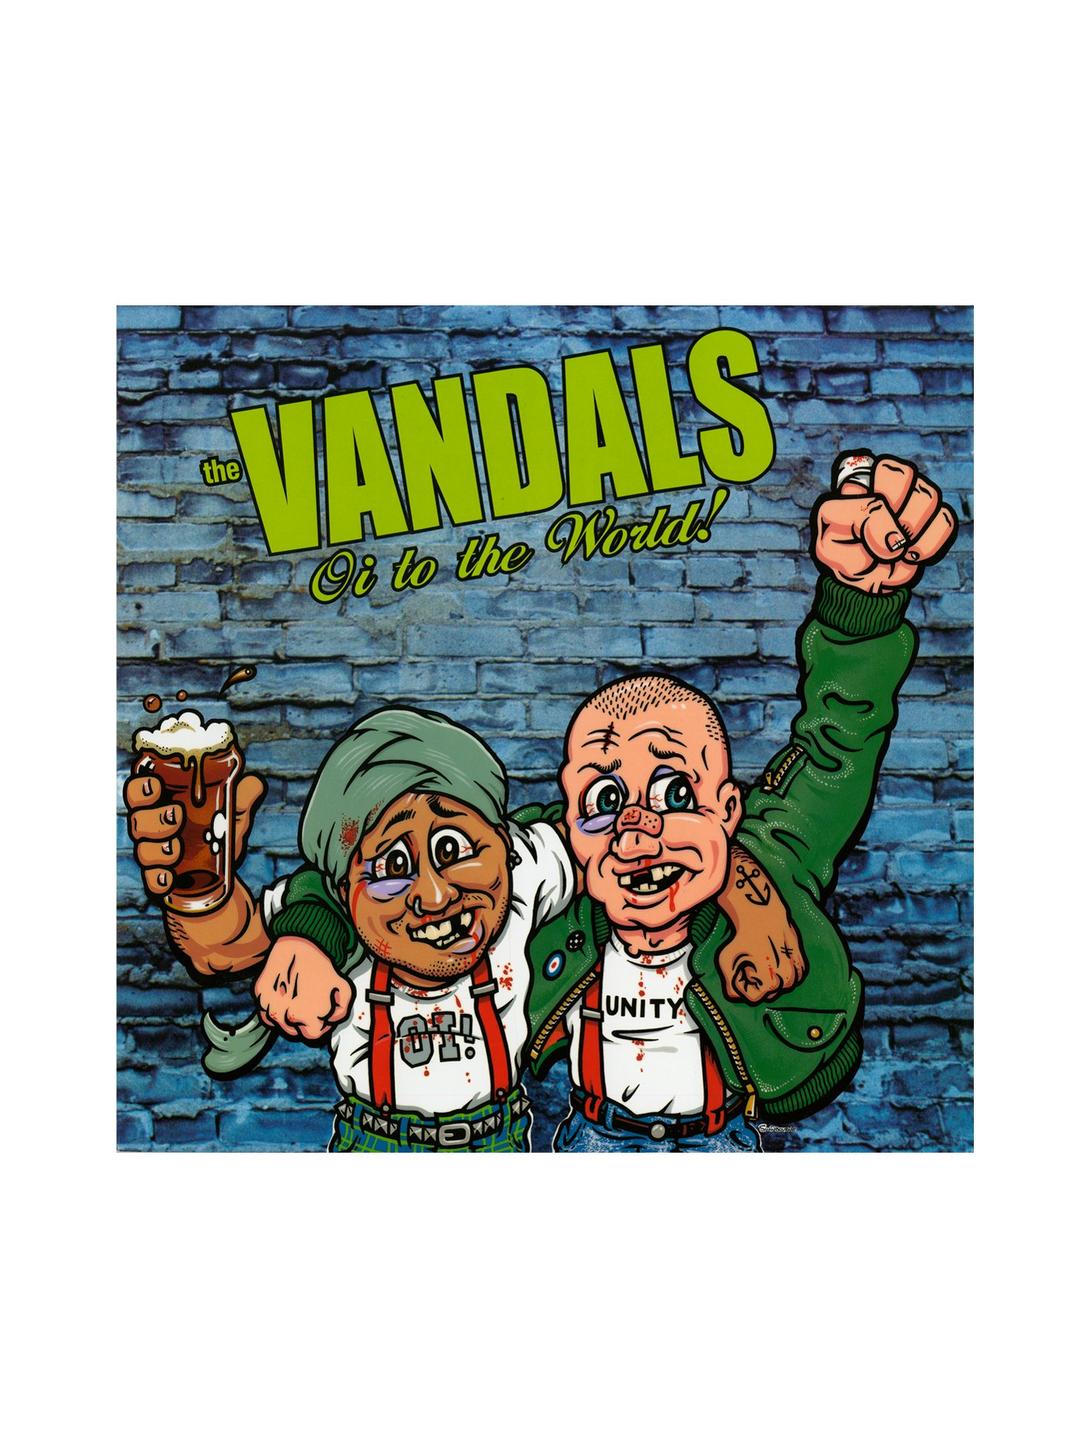 The Vandals - Oi To The World Vinyl LP Hot Topic Exclusive, , hi-res